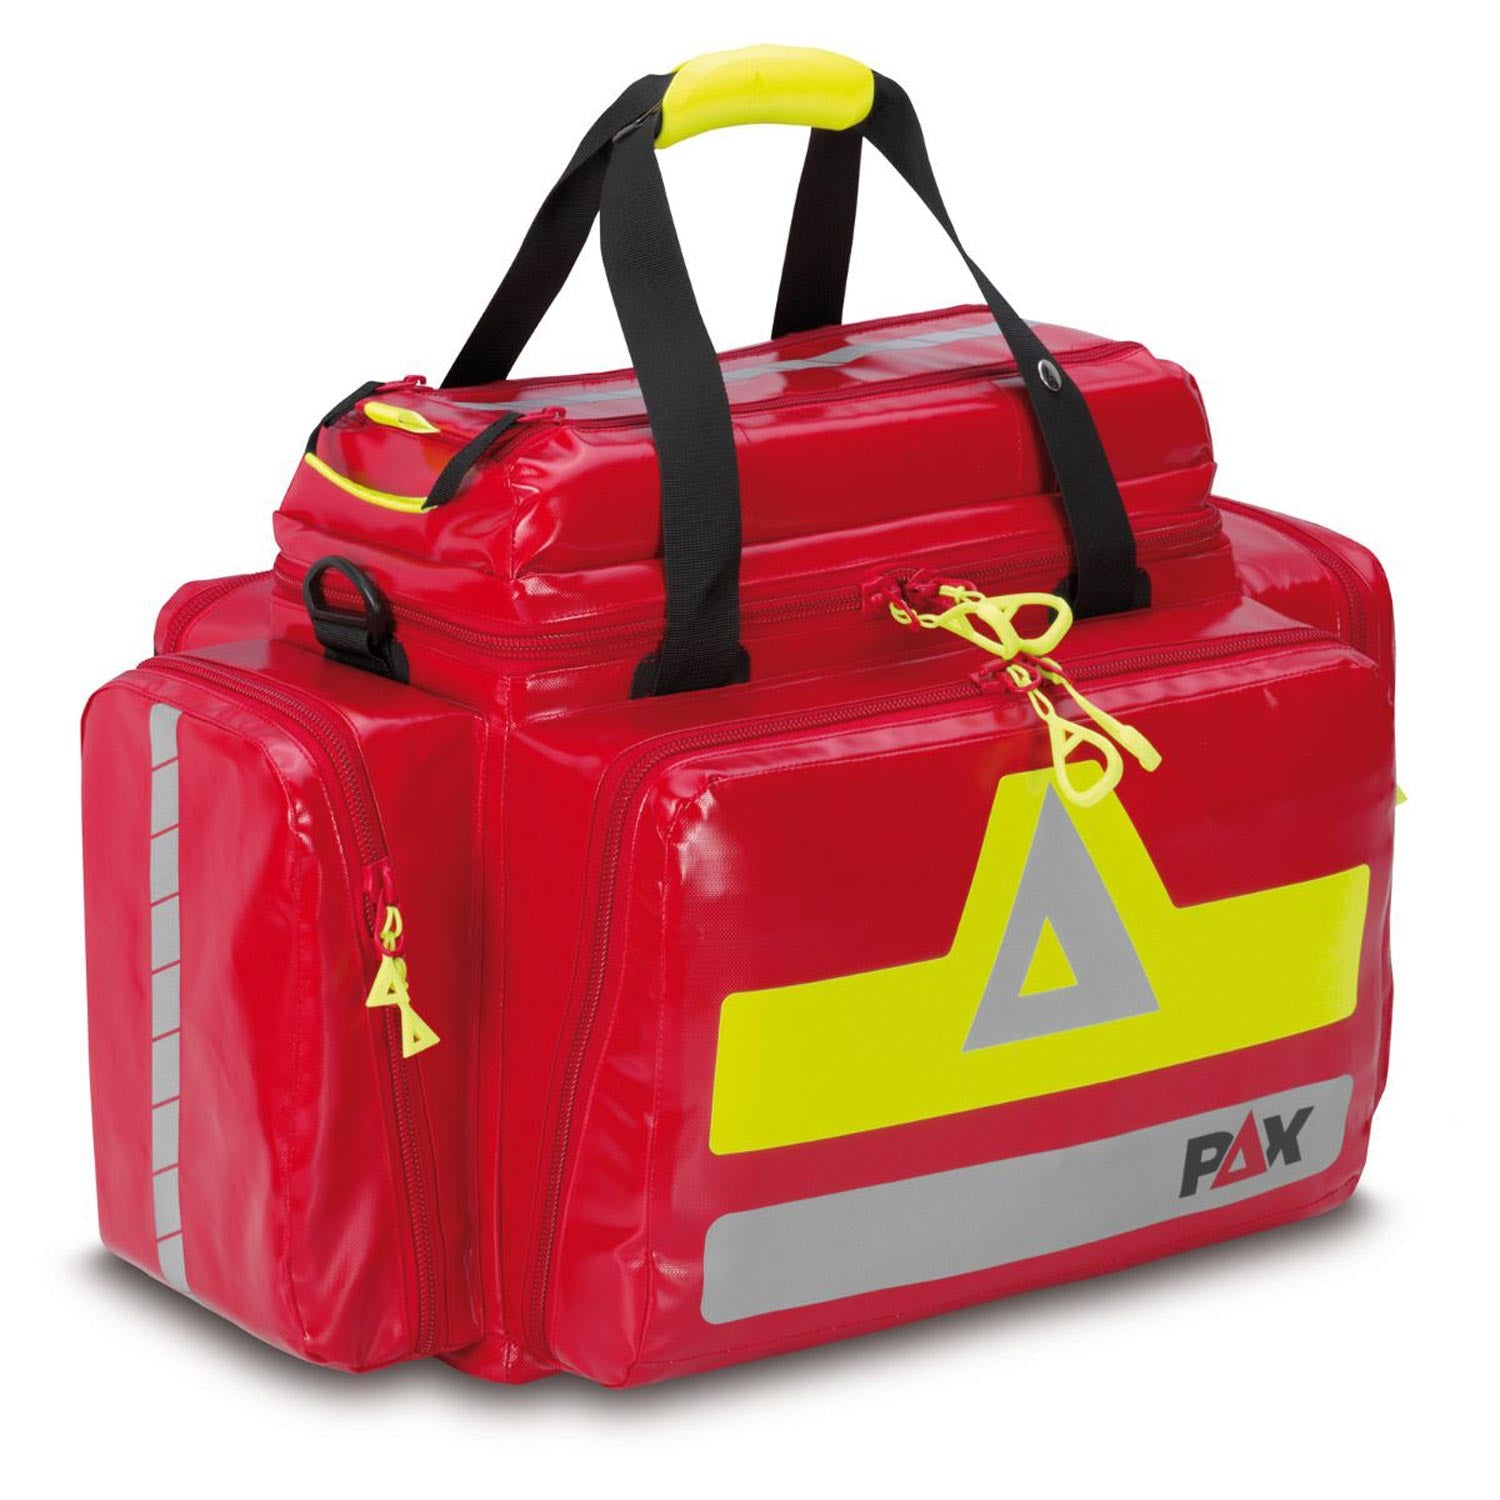 Pax Emergency Bag Dresden For Daily And Professional Use In Rescue Services